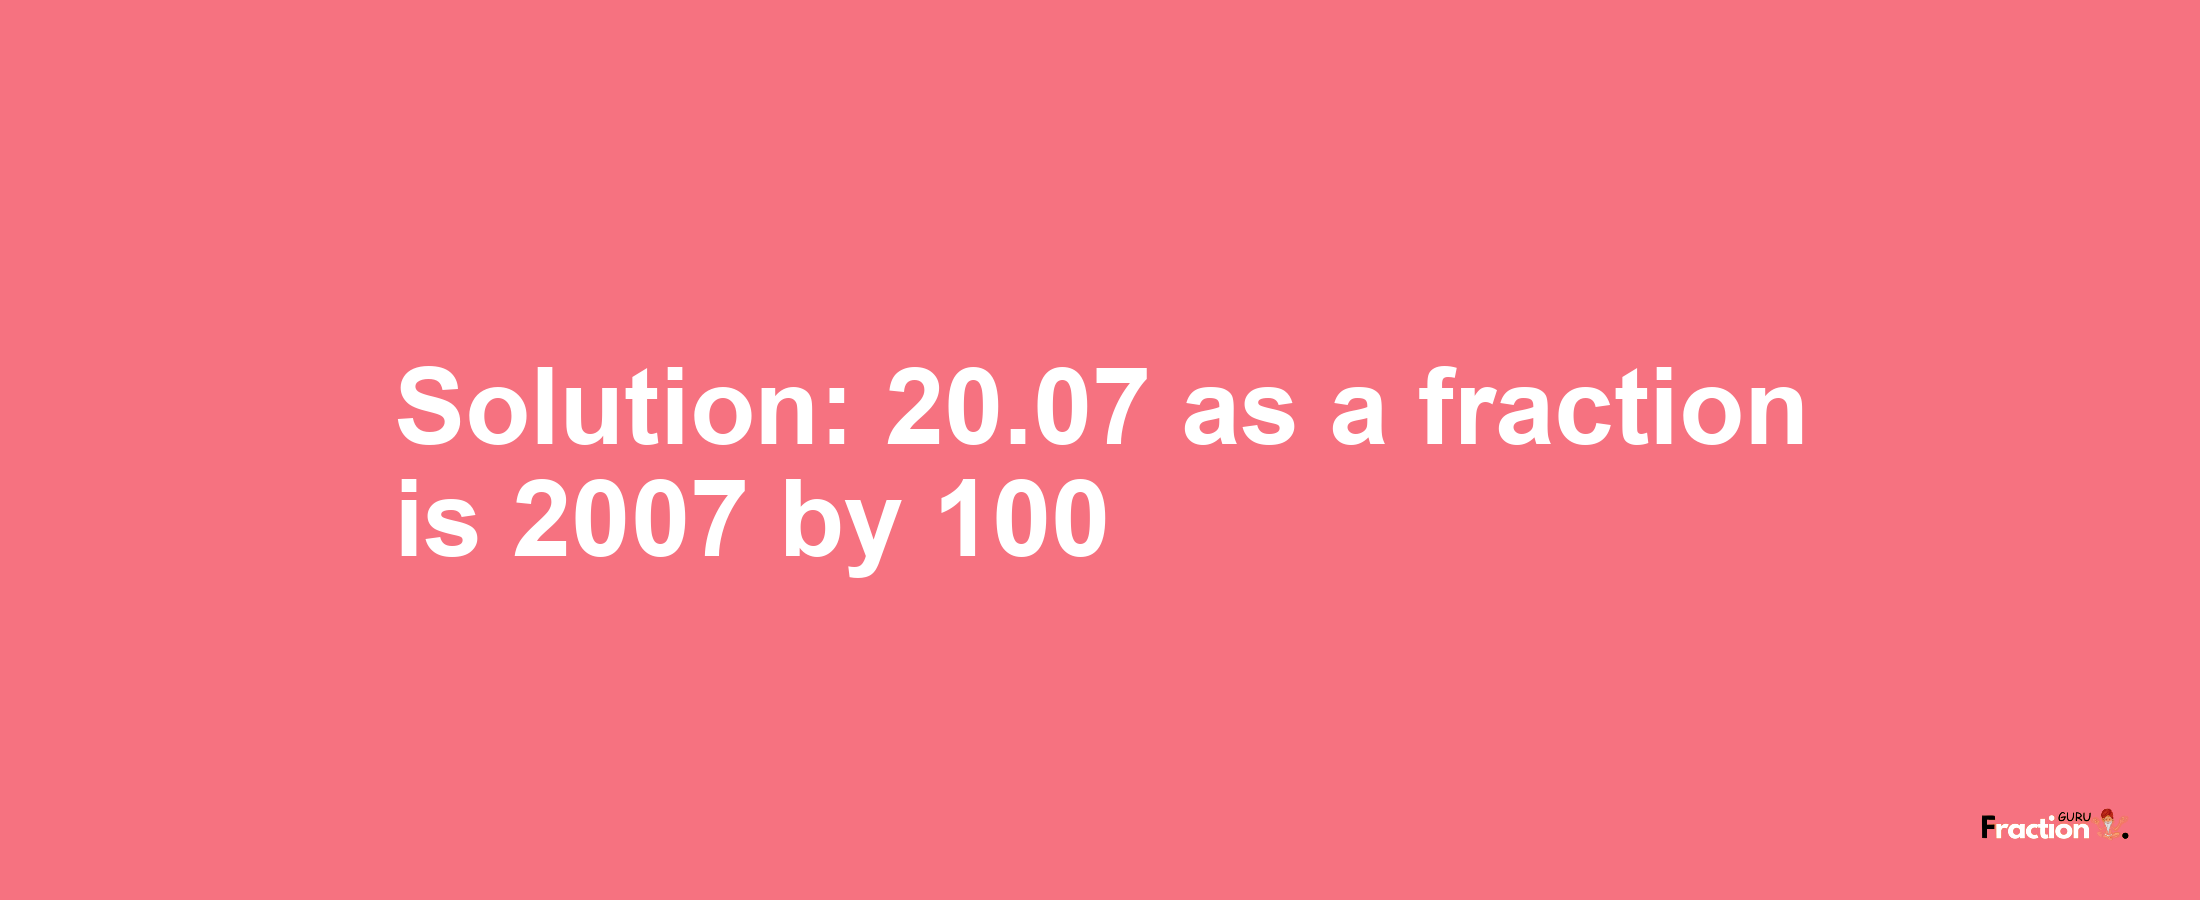 Solution:20.07 as a fraction is 2007/100